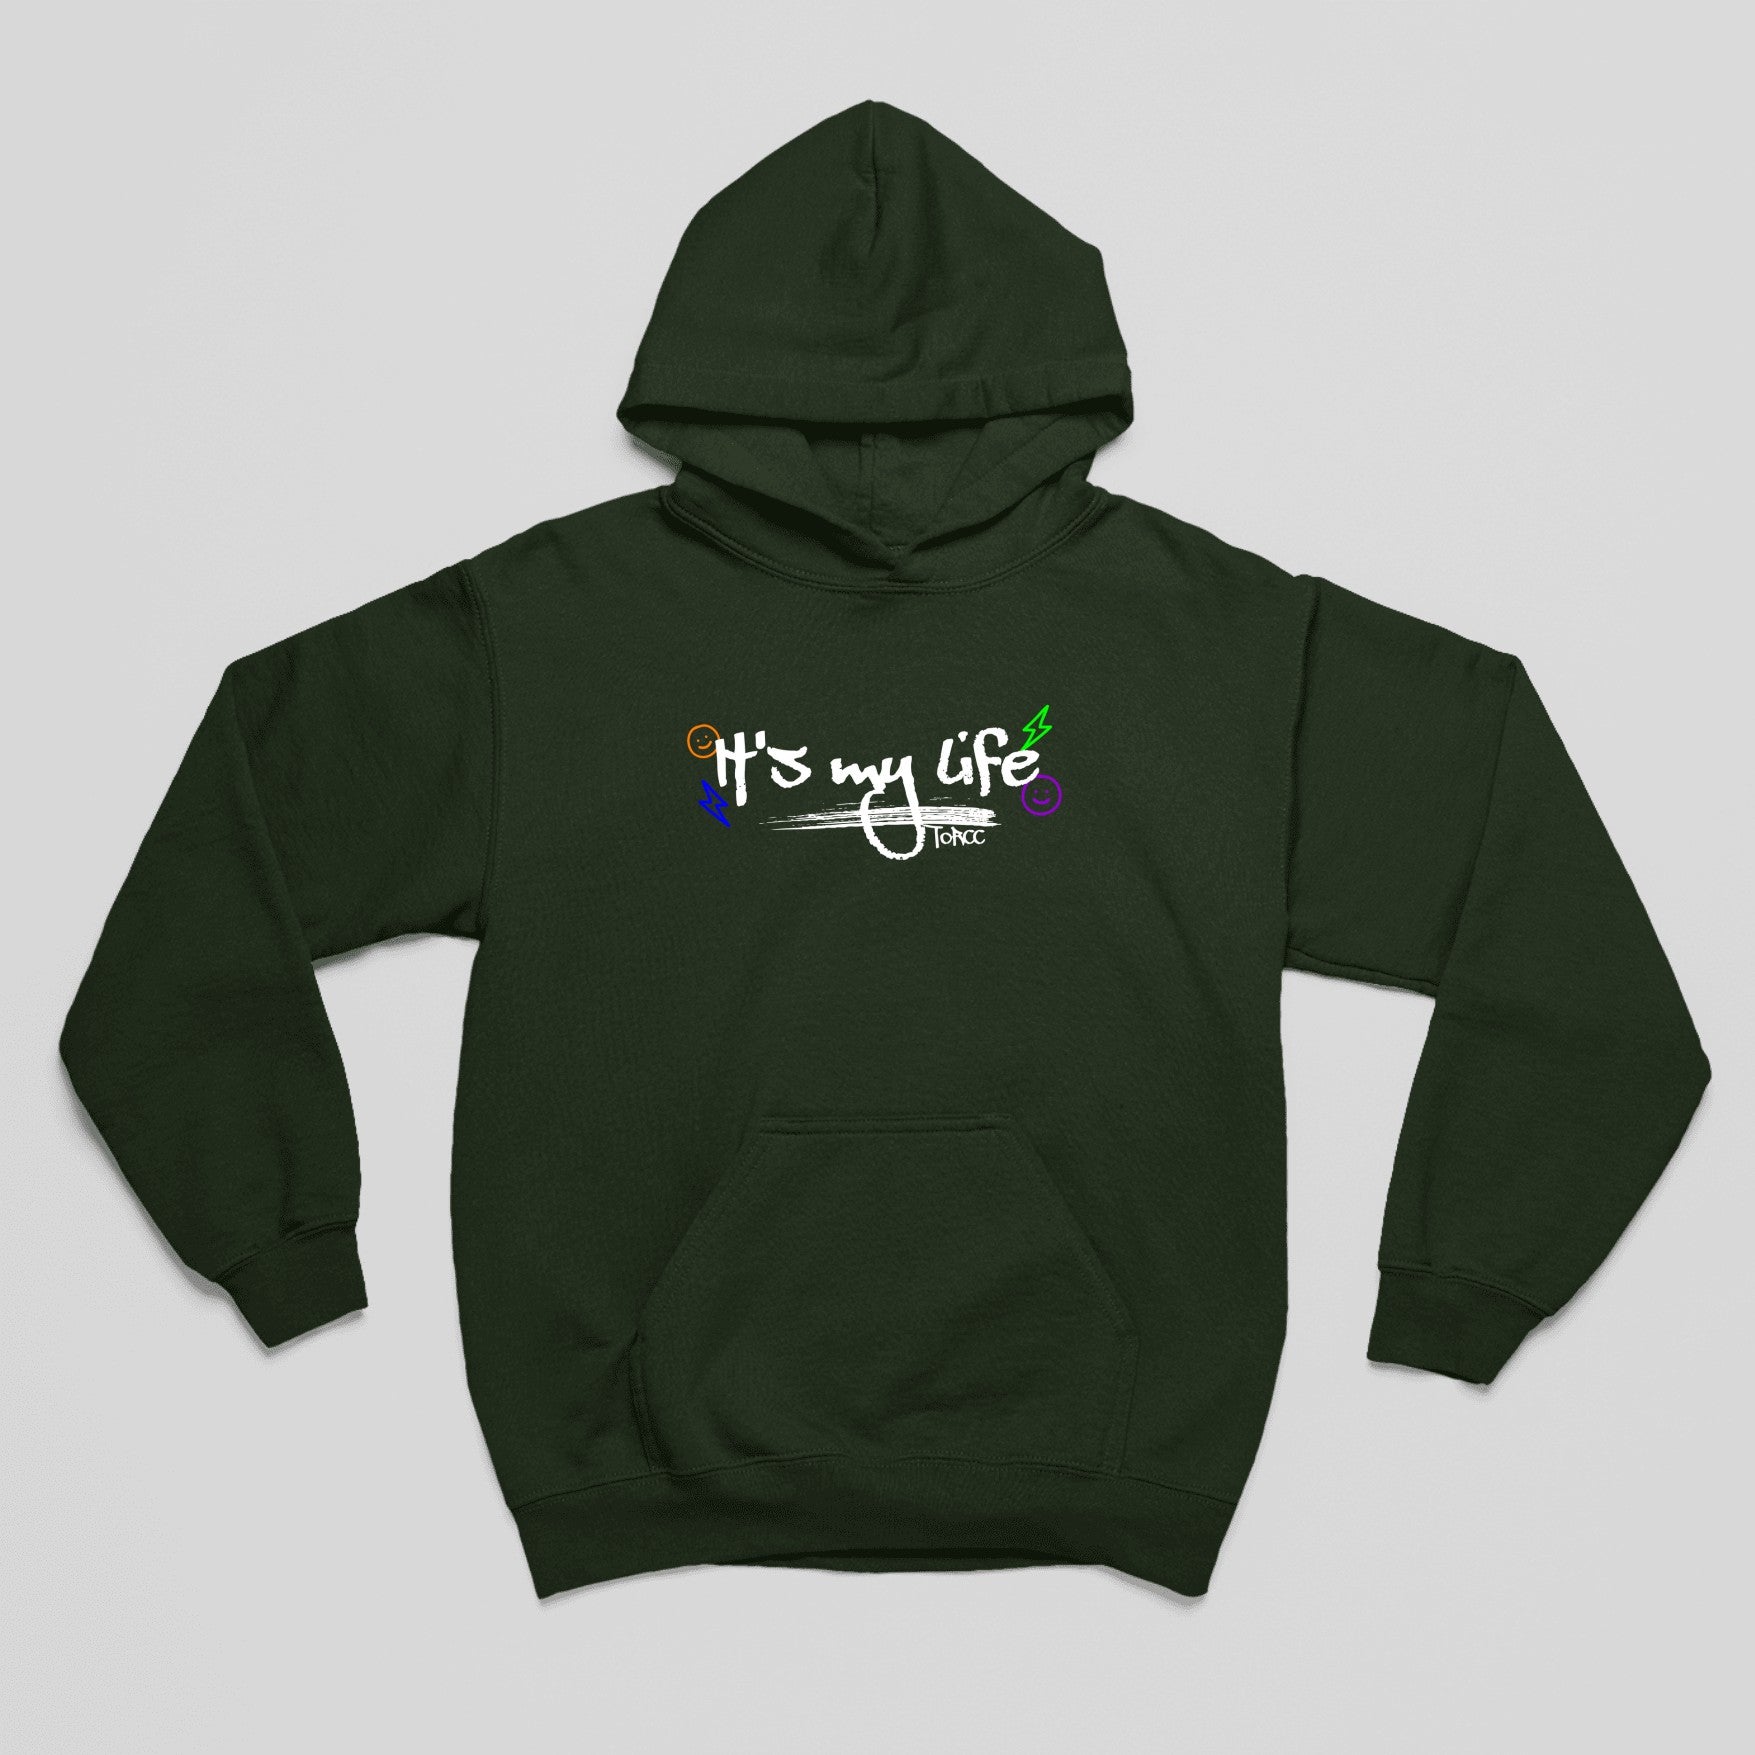 Forest Green My Life: Graphic Hoodie For Men and Womenoversized tshirt for men, oversized tshirt for women, graphic oversized tshirt, streetwear oversized tshirt, oversized tshirt, oversized tee, hoodies for men, hoodies for women, hoodies on sale, hoodies on sale india, hoodies men